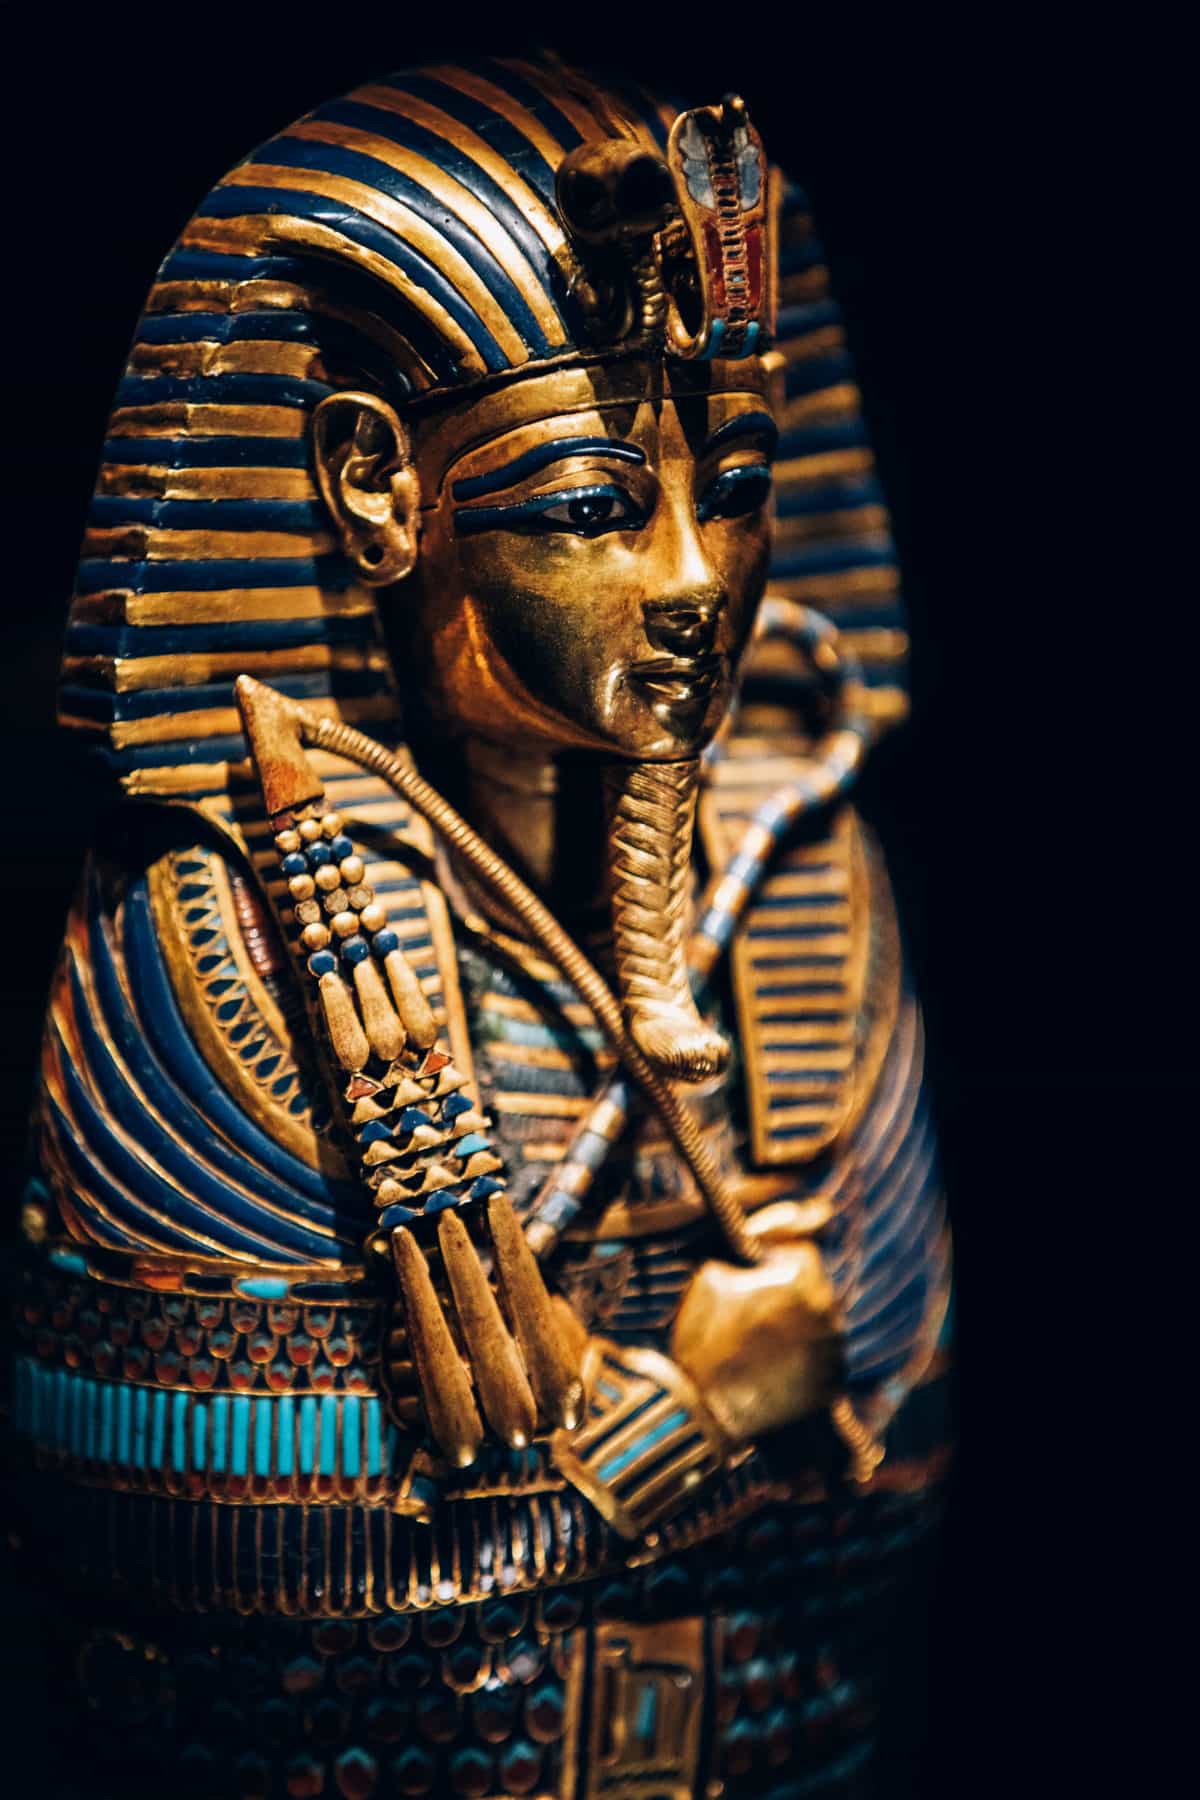 Tutankhamun's Coffinette that looks like a smaller version of the death mask. The coffinette is currently on display at the Saatchi Gallery in London.